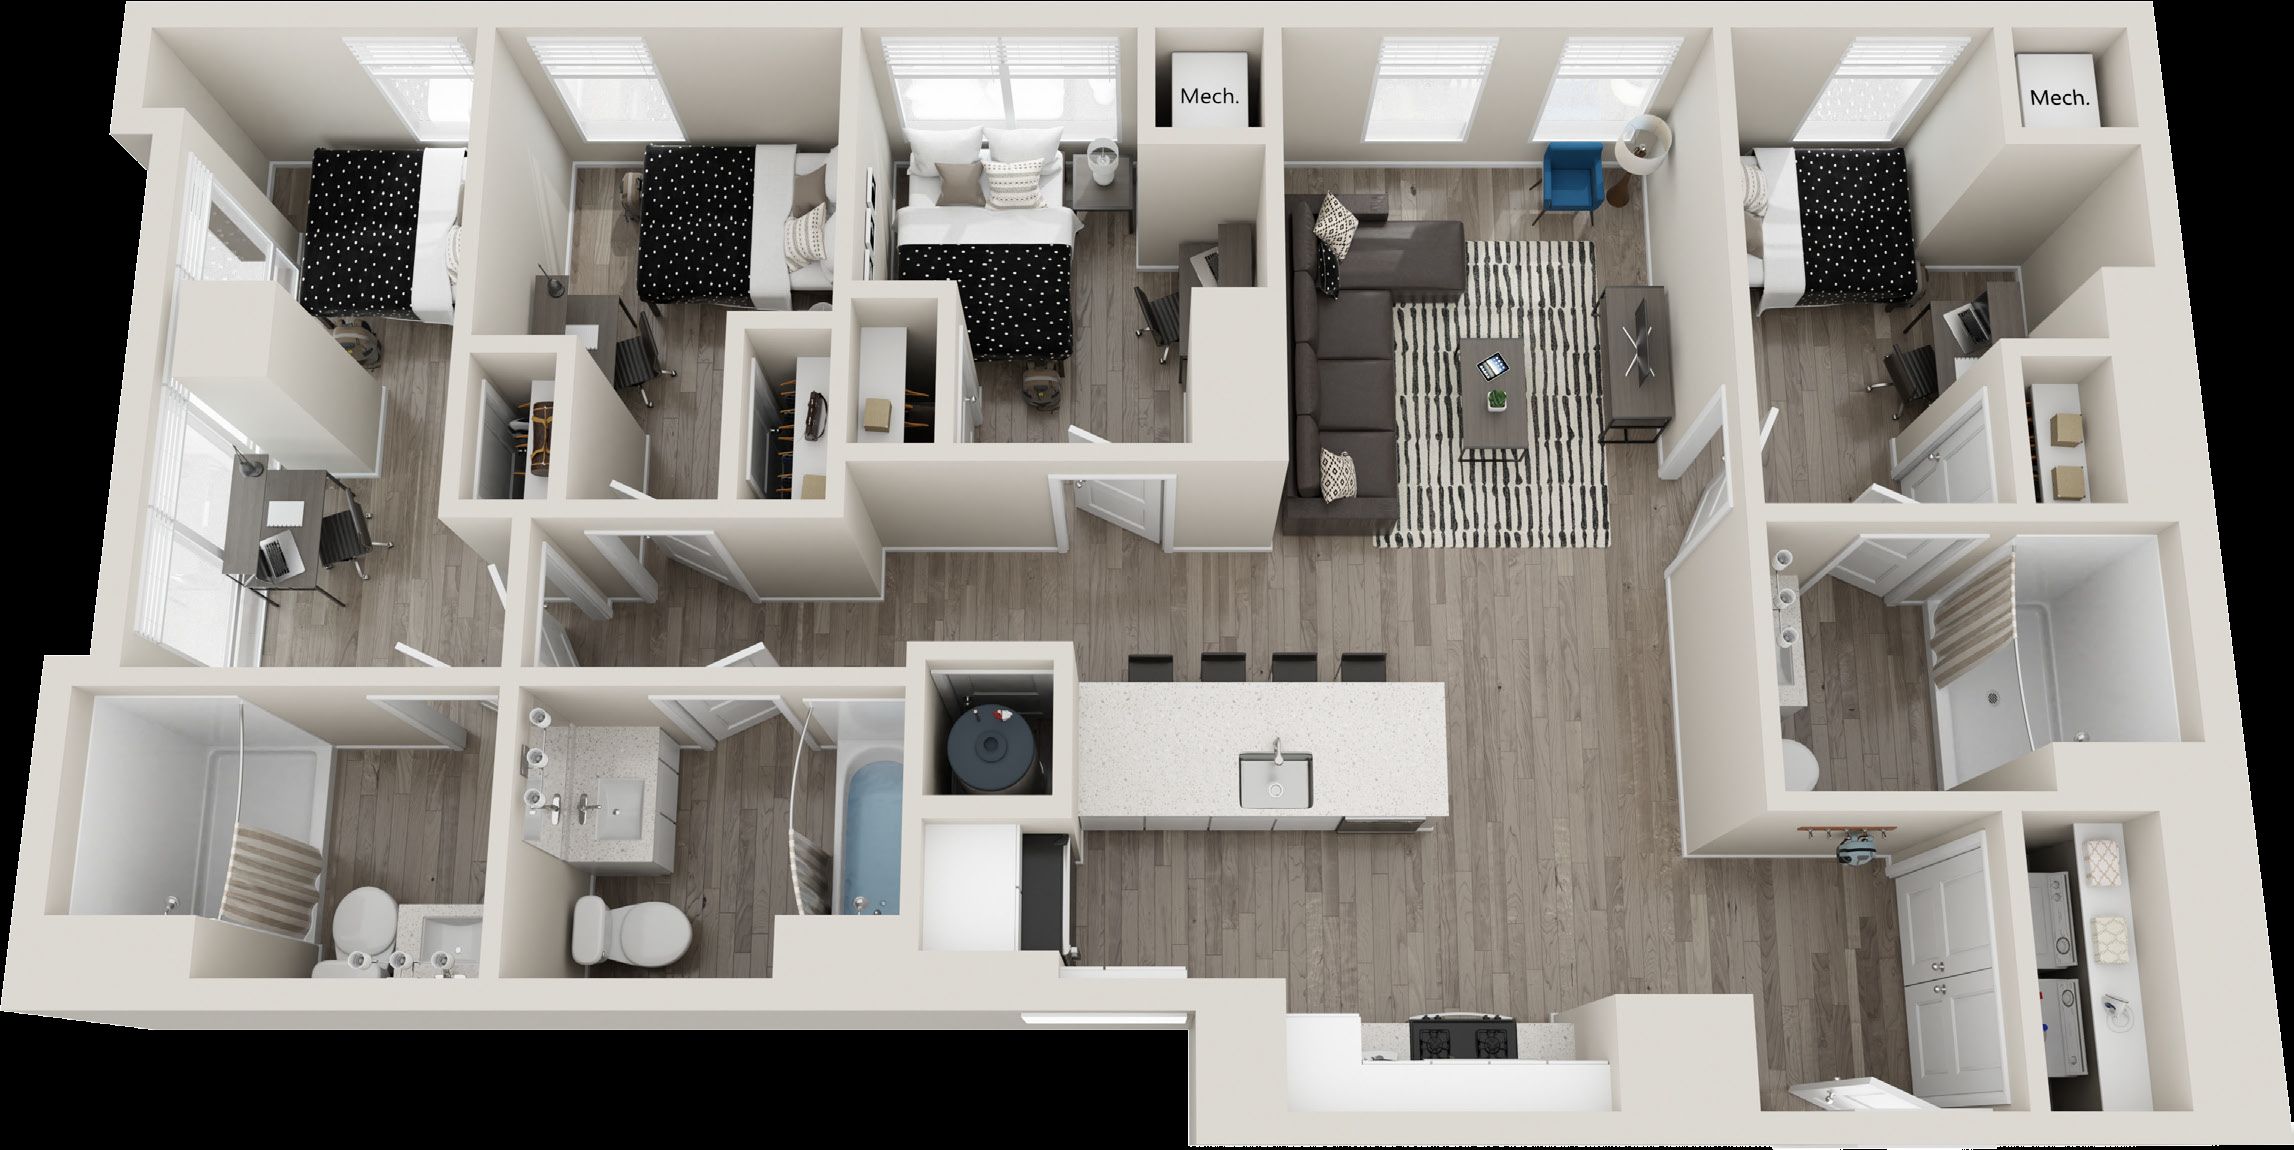 The Standard at Philadelphia at 119 South 31st Street. Floor plan of a four-bedroom apartment of type Dover. Credit: Landmark Properties